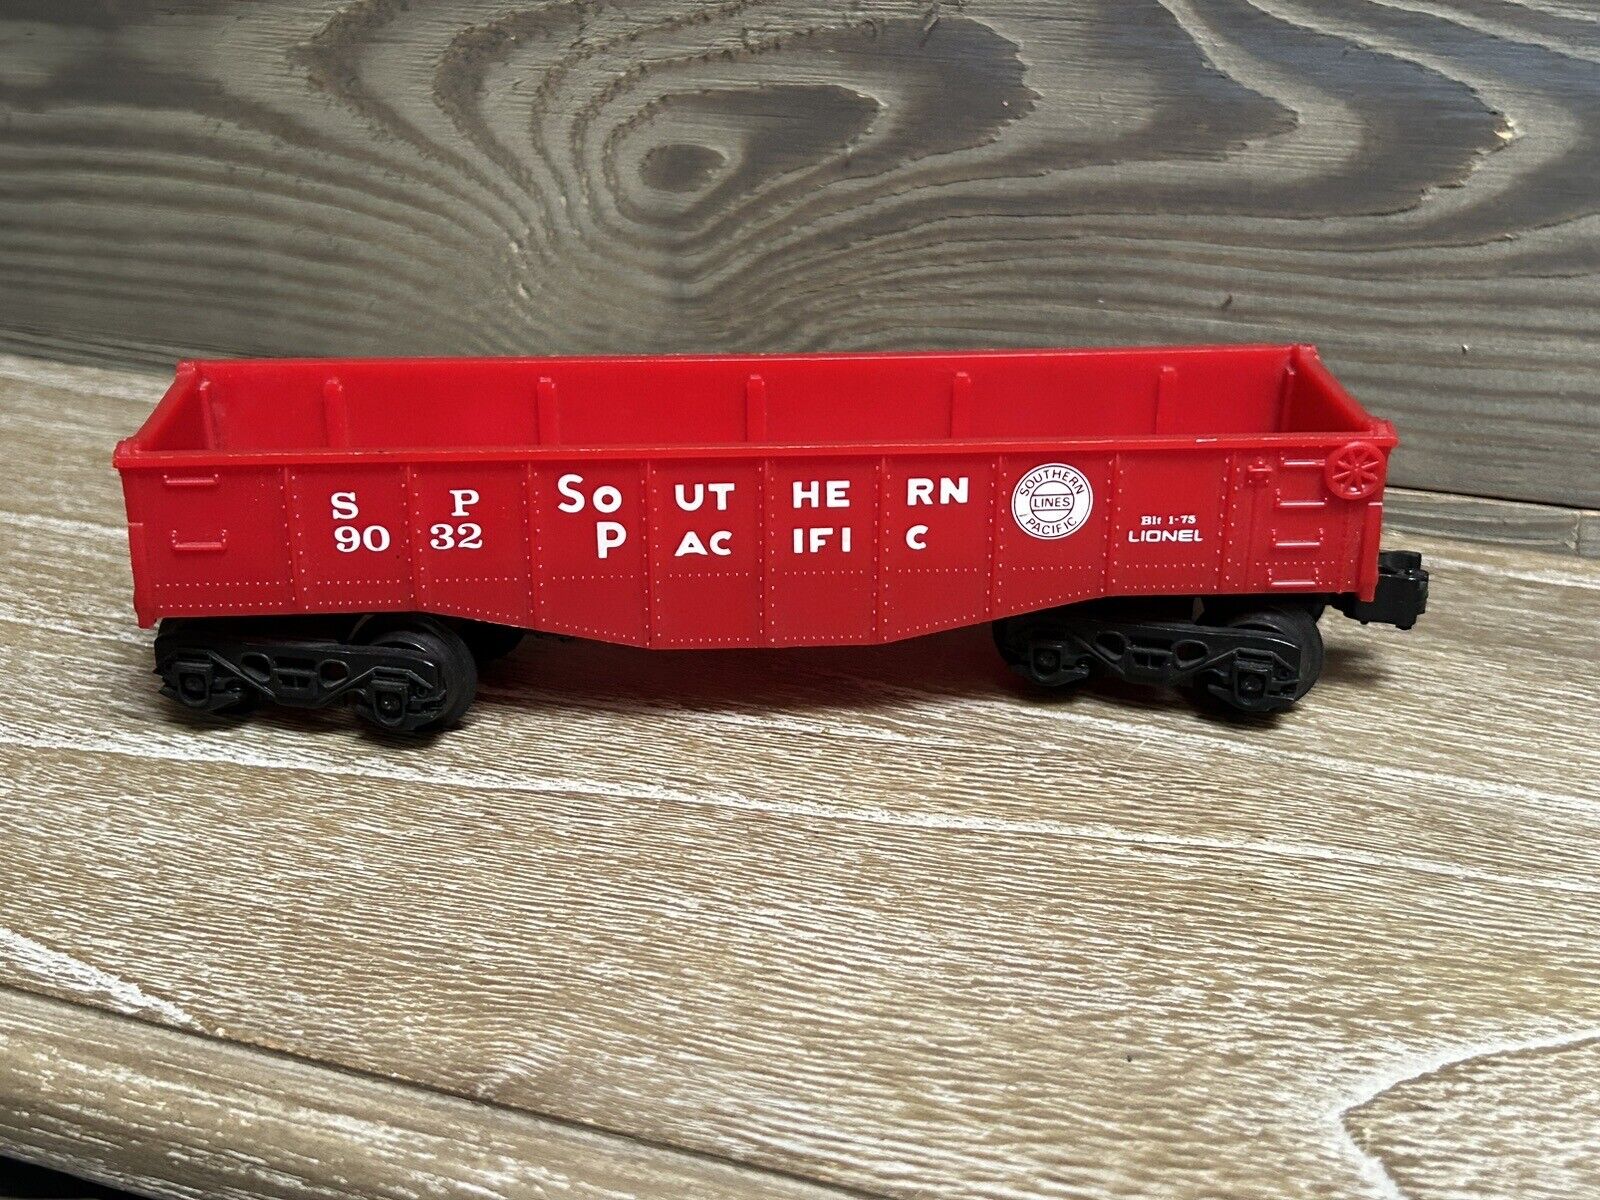 VINTAGE LIONEL SOUTHERN PACIFIC HOBBY TRAIN OPEN GONDOLA NO SP 9032 RED O GAUGE